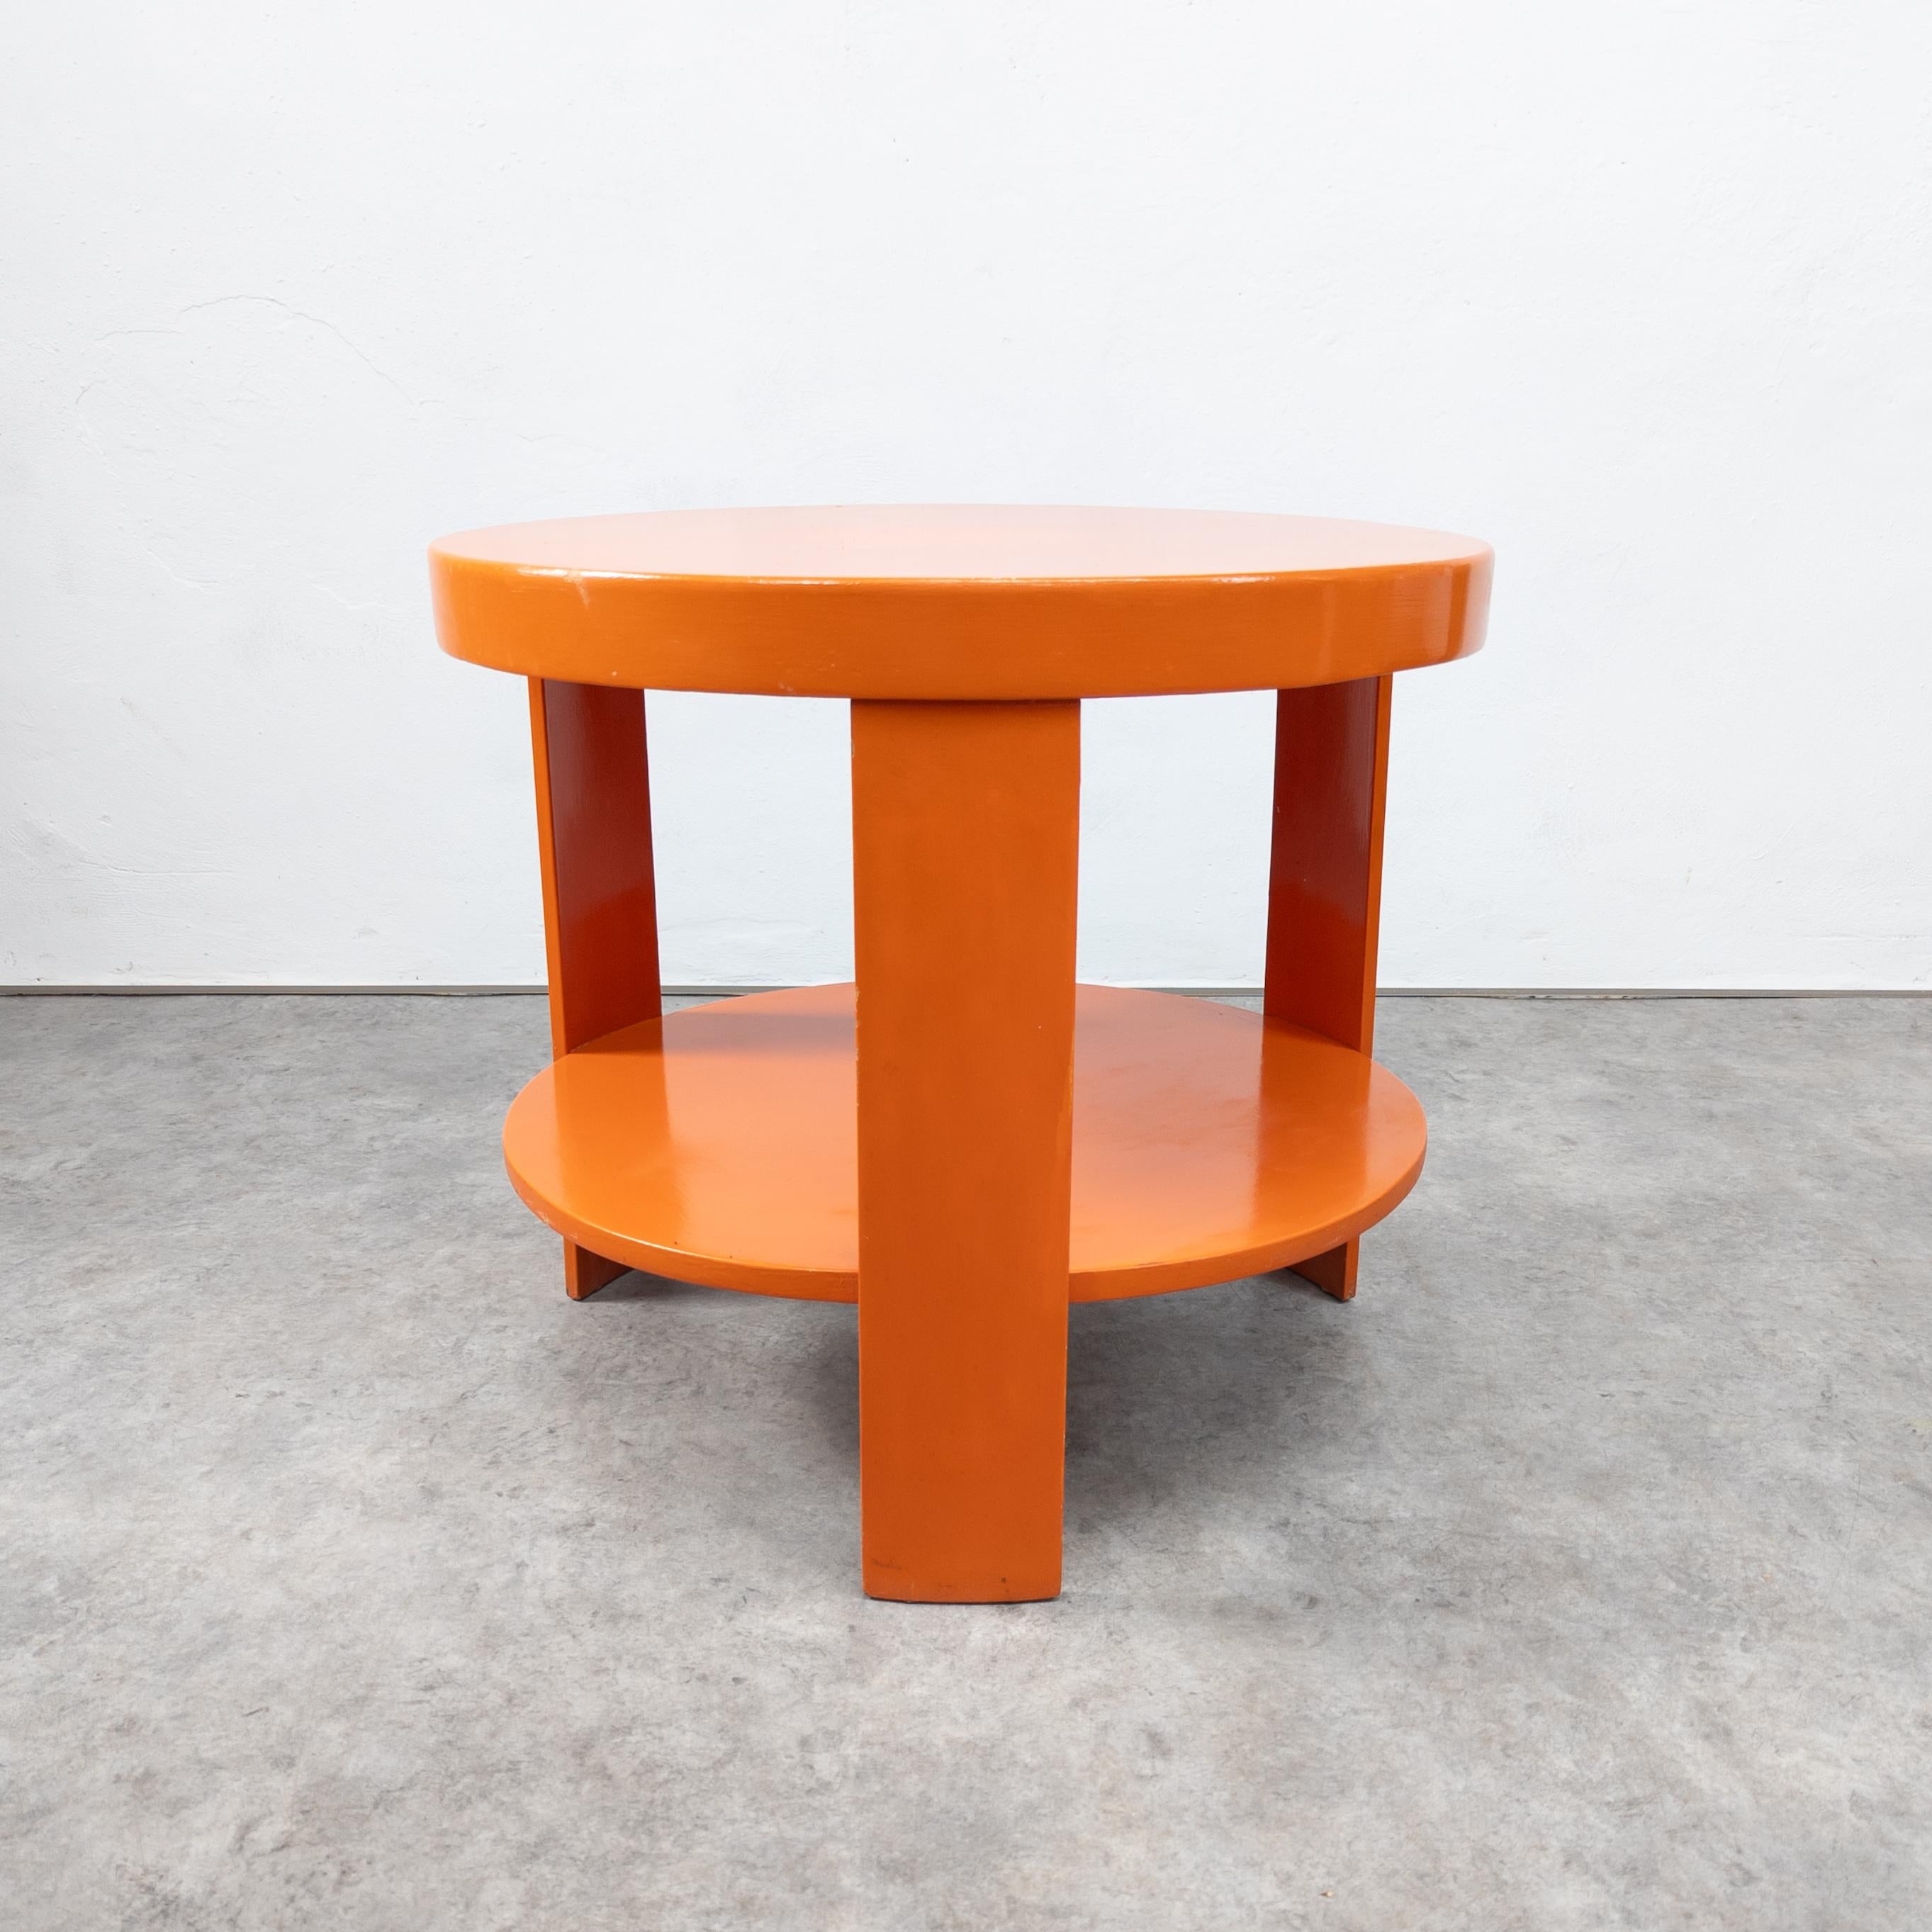 Very rare modernist coffee table designed by Josef Frank. First appeared in 1930 Thonet catalogue under number T 142. In bright orange bauhaus color. In original condition with some scratches on the lacquer. Structurally sound.